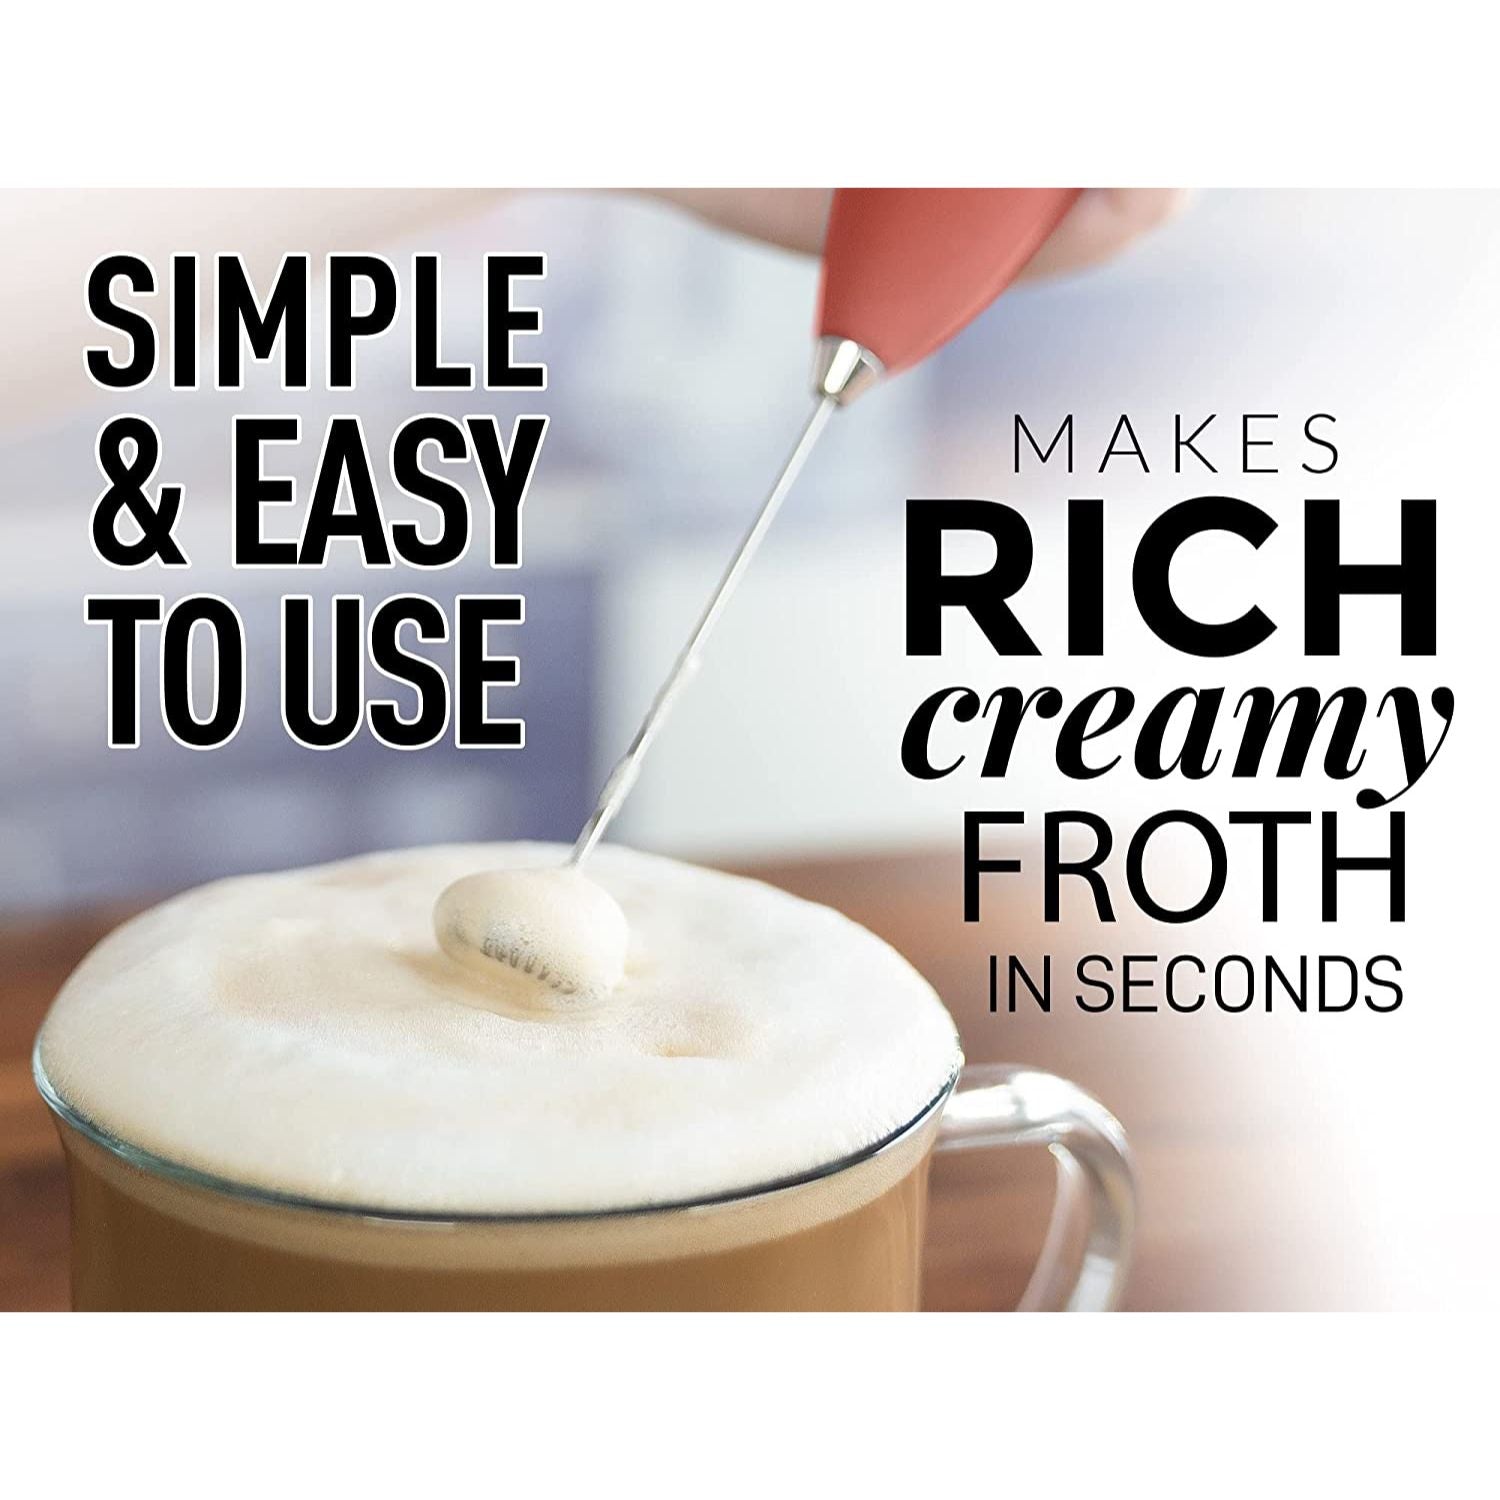 Milk Frother OG With Stand